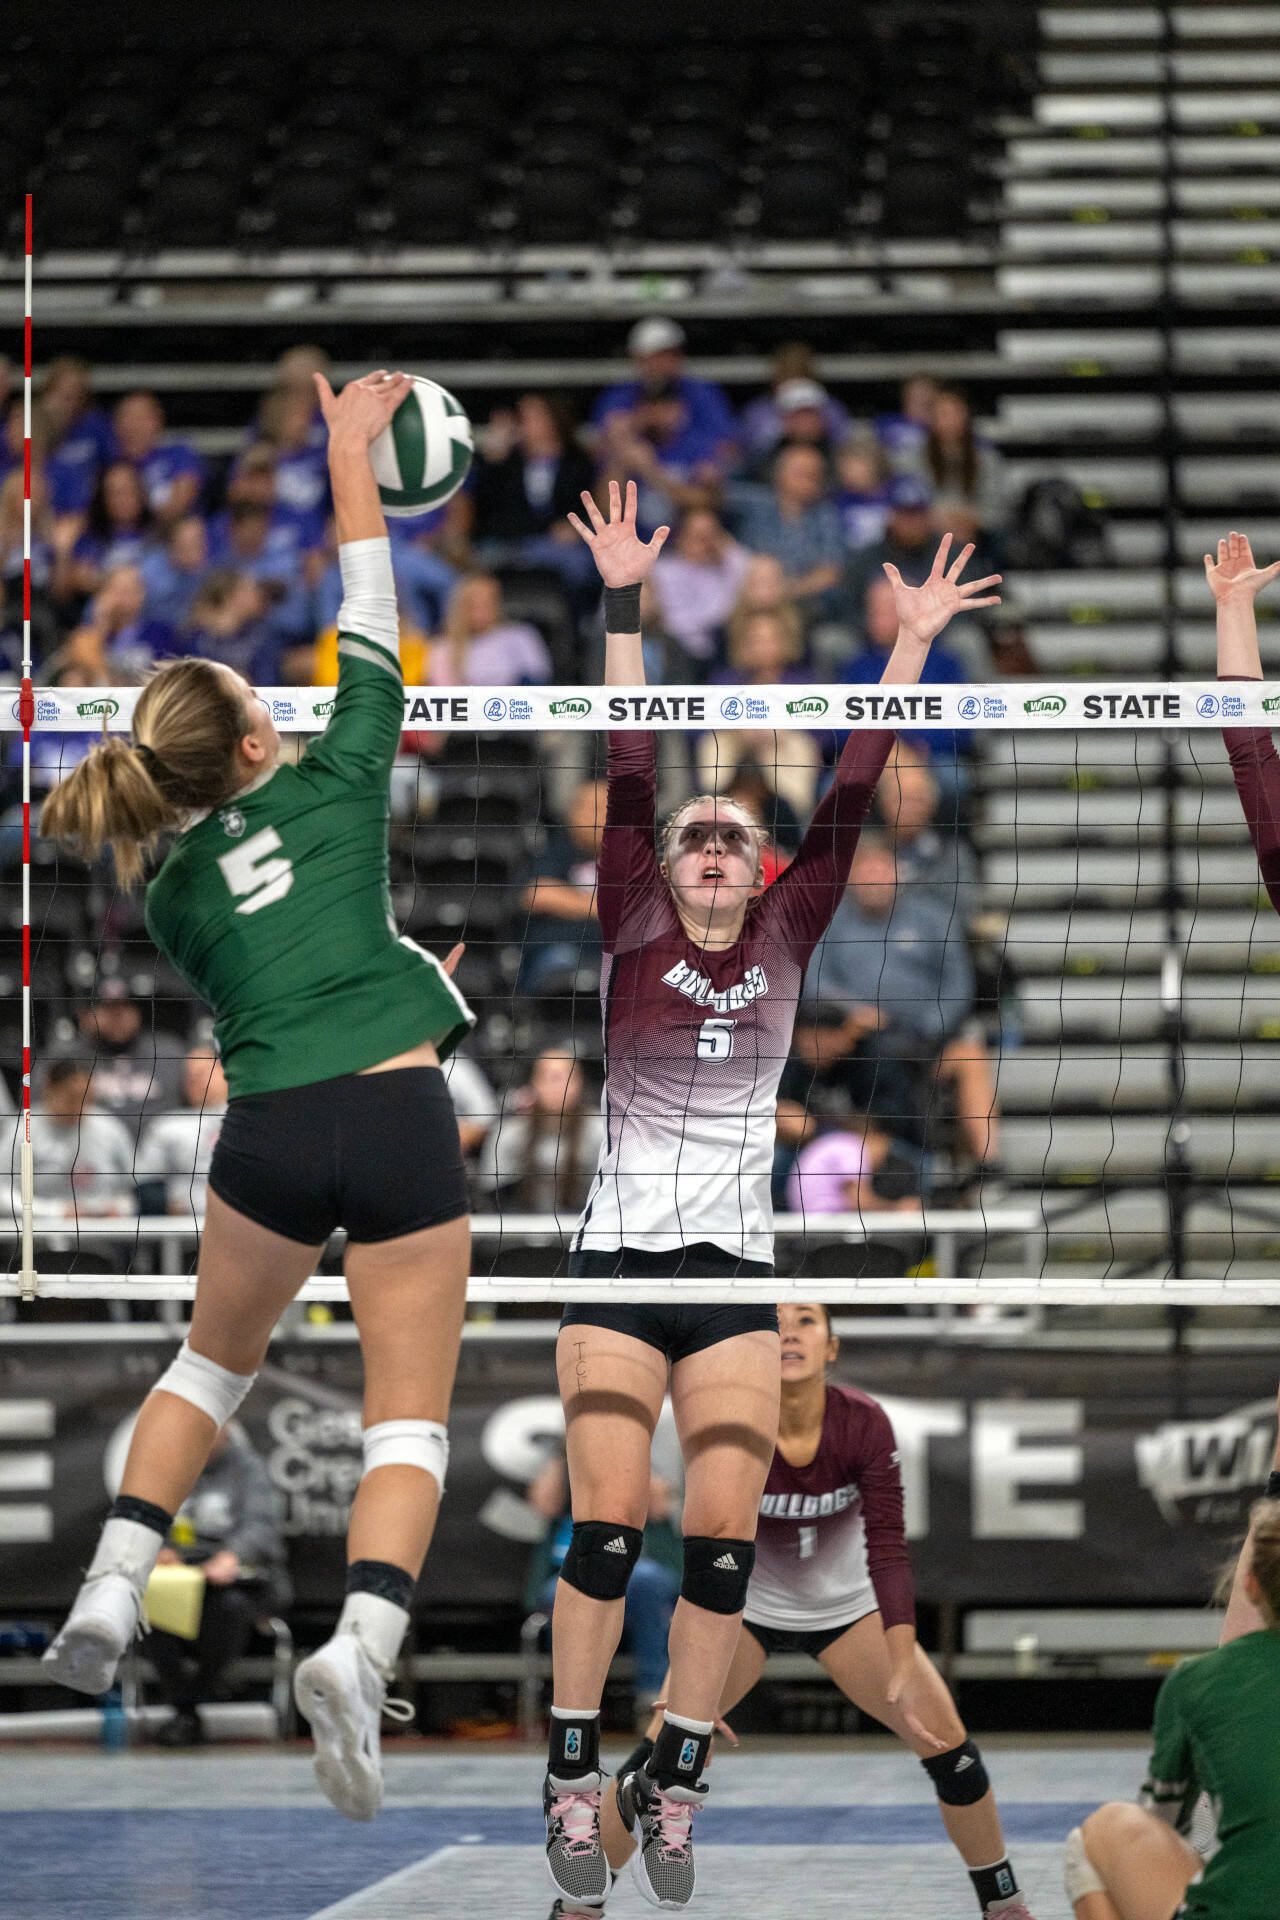 PHOTO BY FOREST WORGUM Montesano’s Karissa Otterstetter attempts to block a kill attempt by Chelan’s Lydia Petersen, left, during the 1A WIAA State Volleyball Tournament on Friday at the Yakima Valley SunDome.